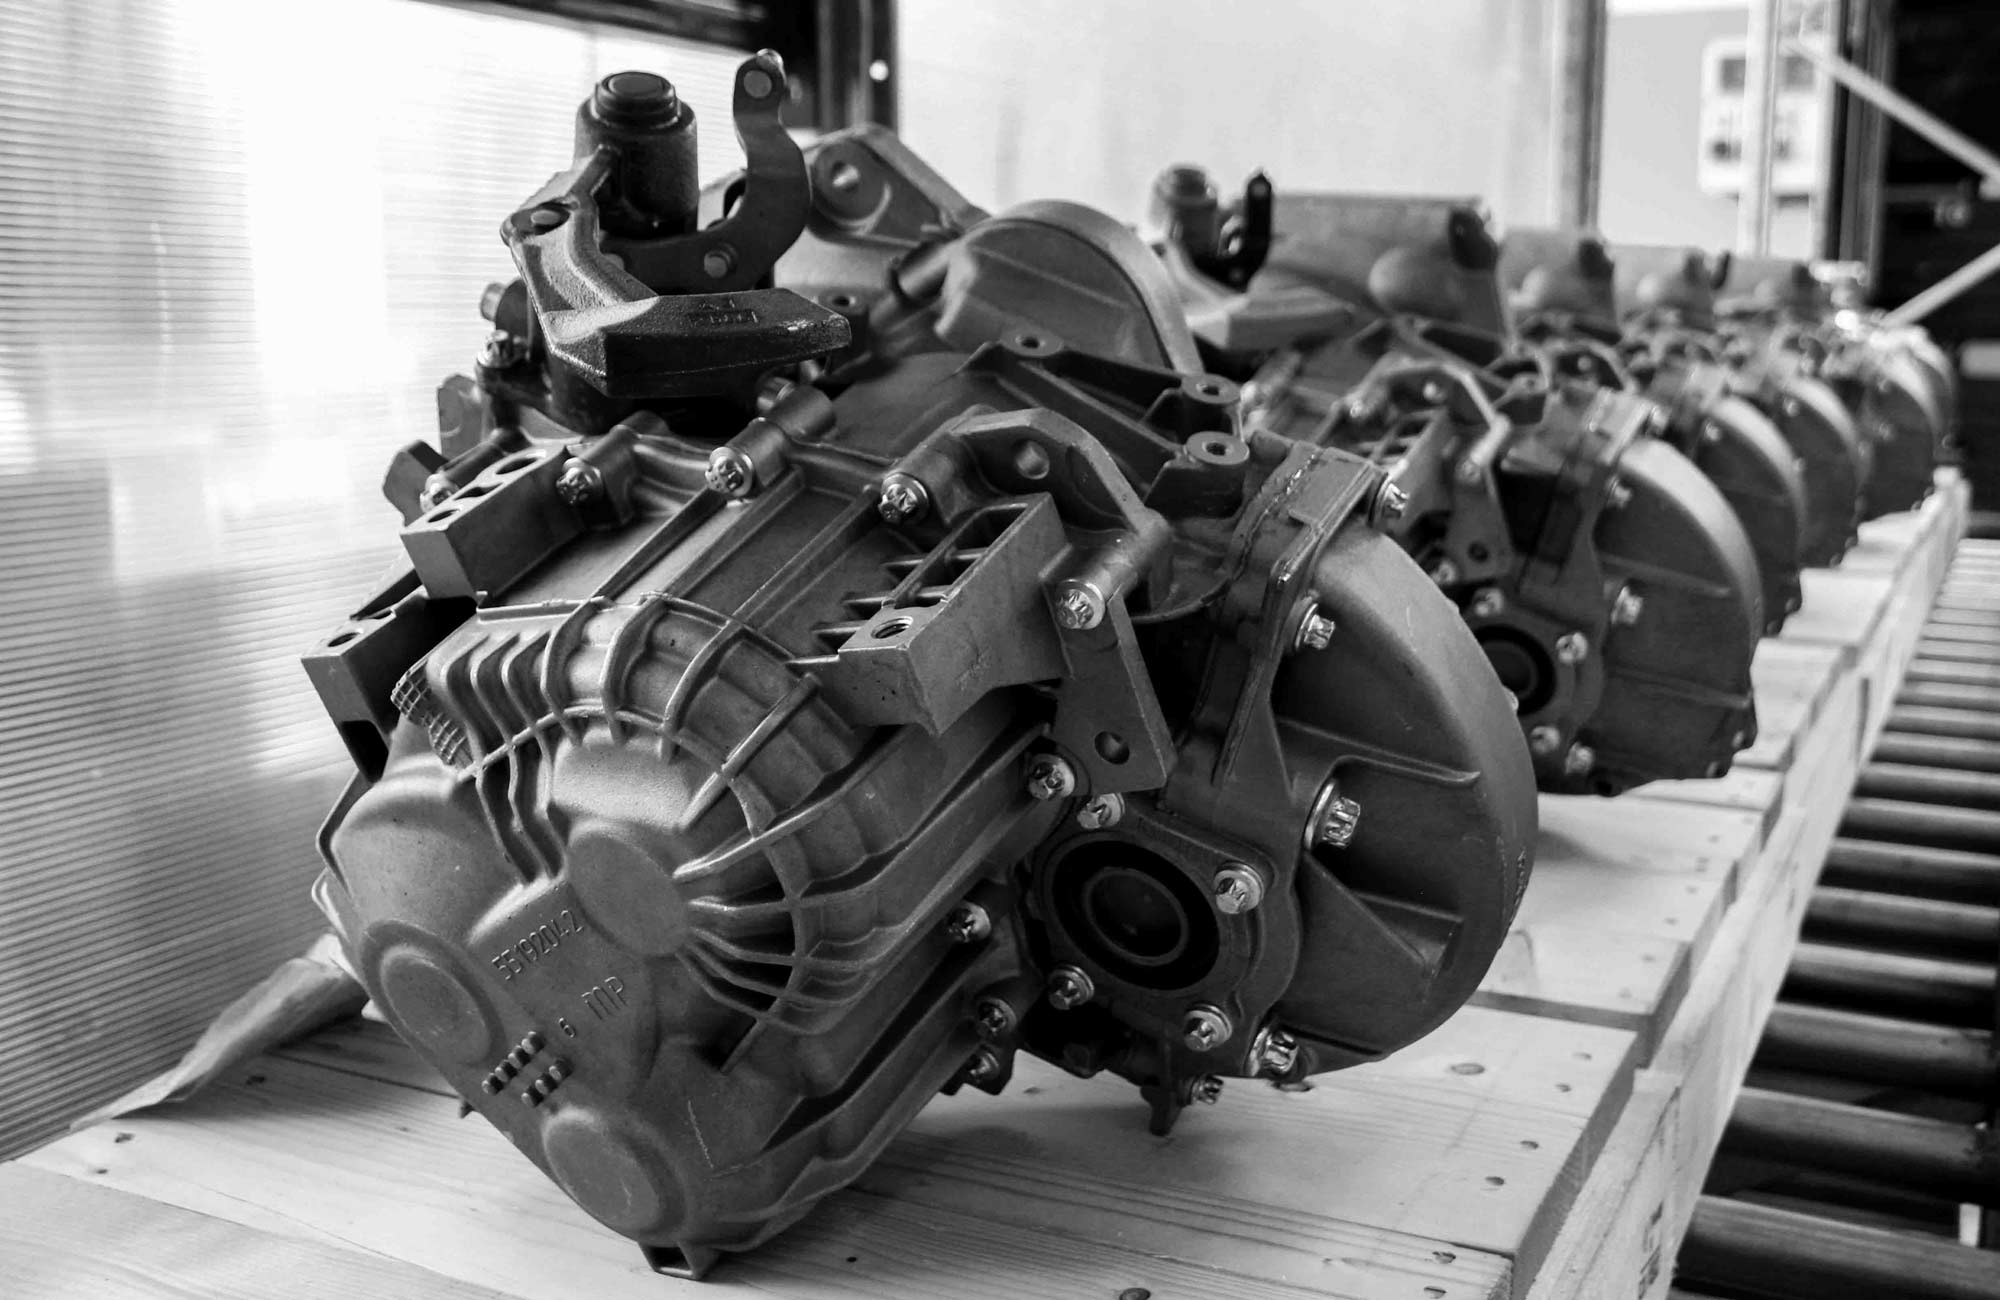 Tecnotrasmissioni Italy - New car gearboxes, transmissions for cars, car differentials